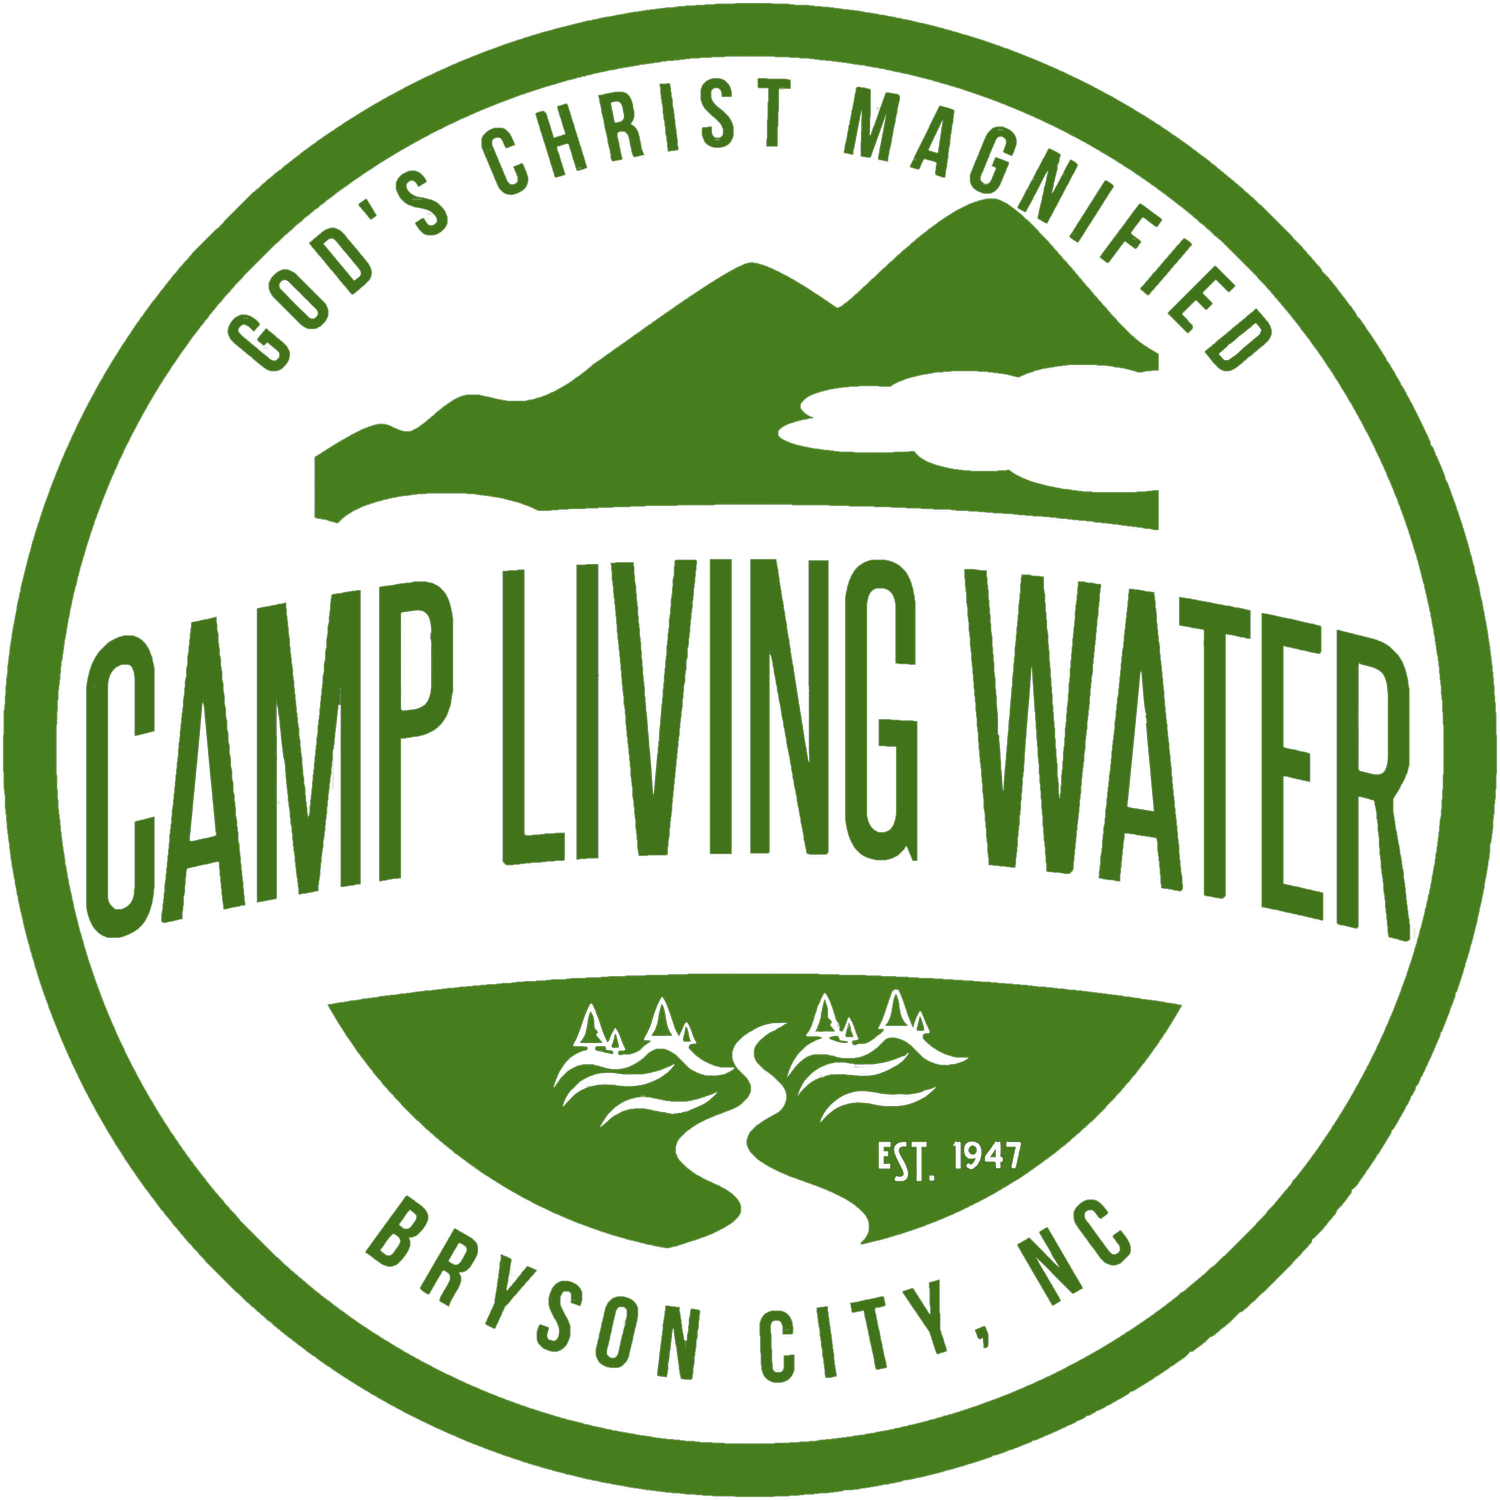 Camp Living Water, Bryson City, NC